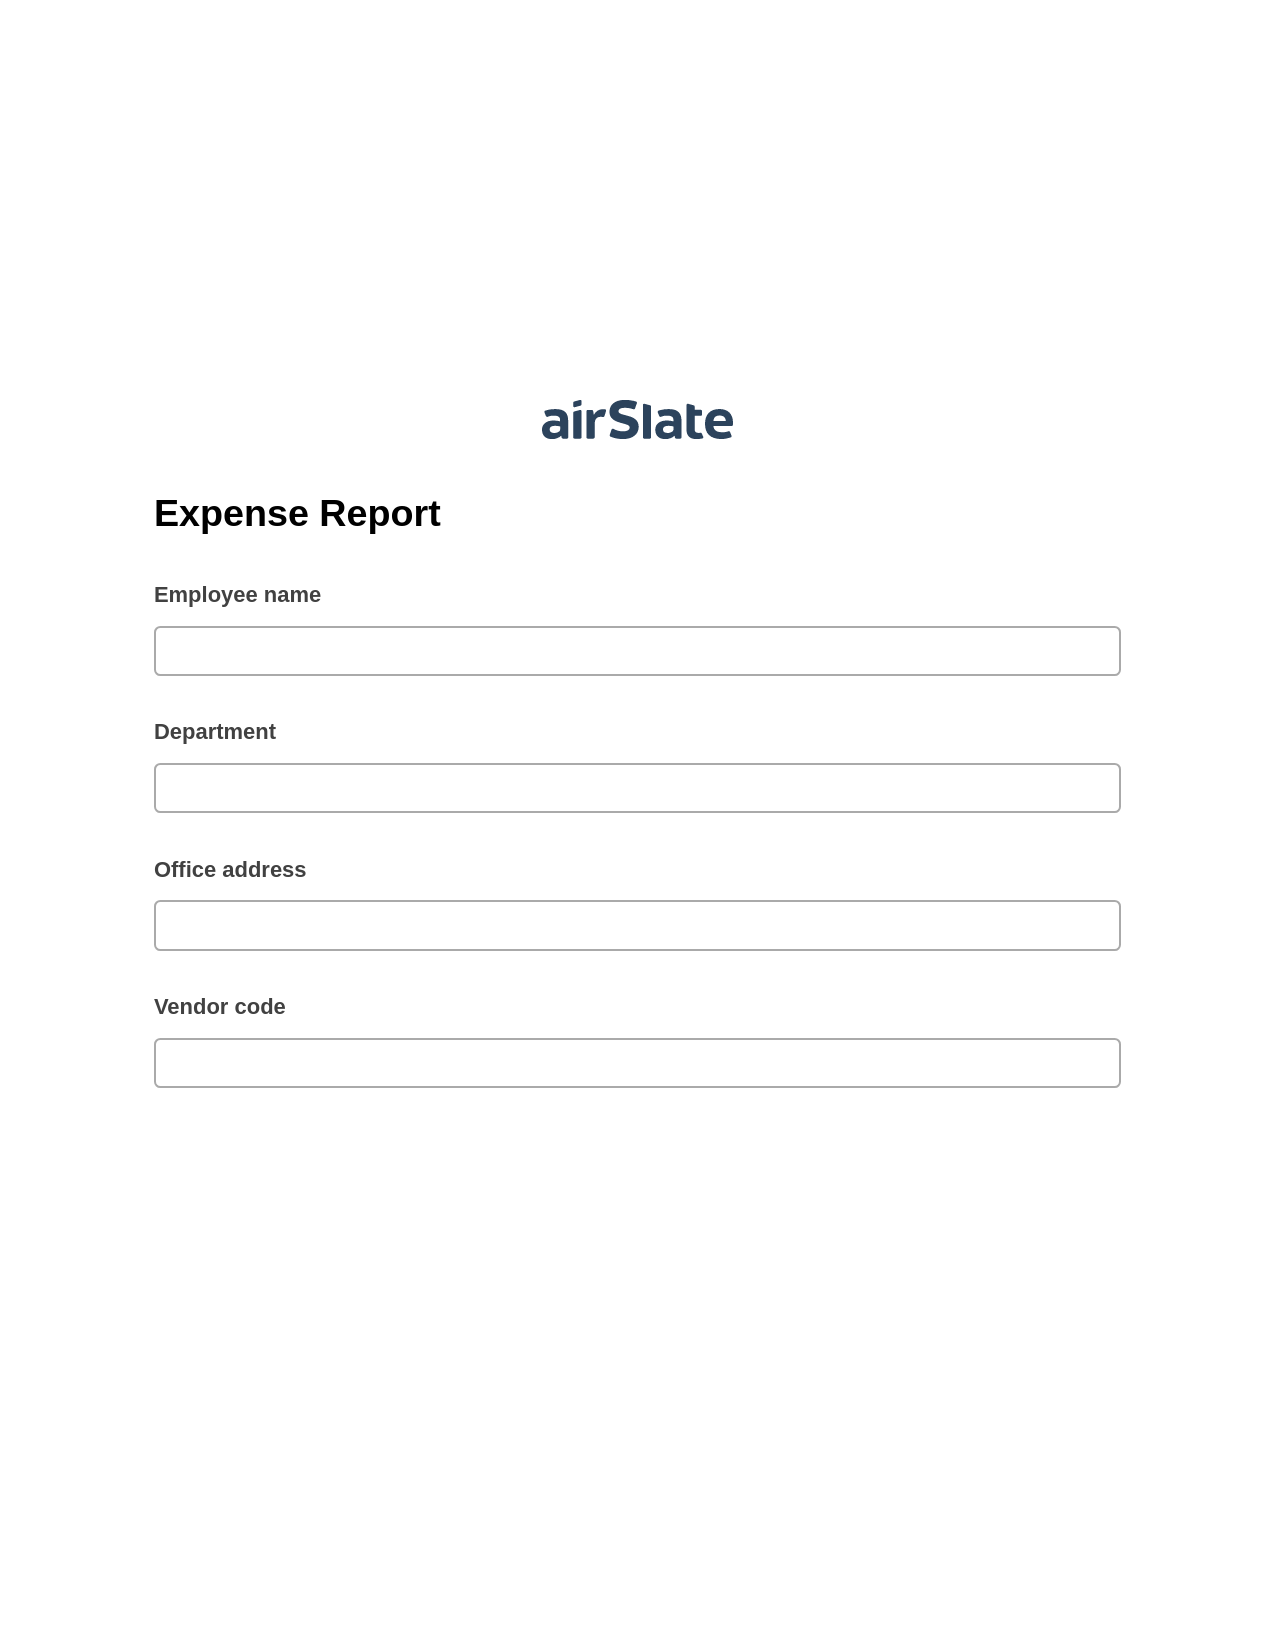 Expense Report Pre-fill from MySQL Bot, Pre-fill with Custom Data Bot, Export to Excel 365 Bot